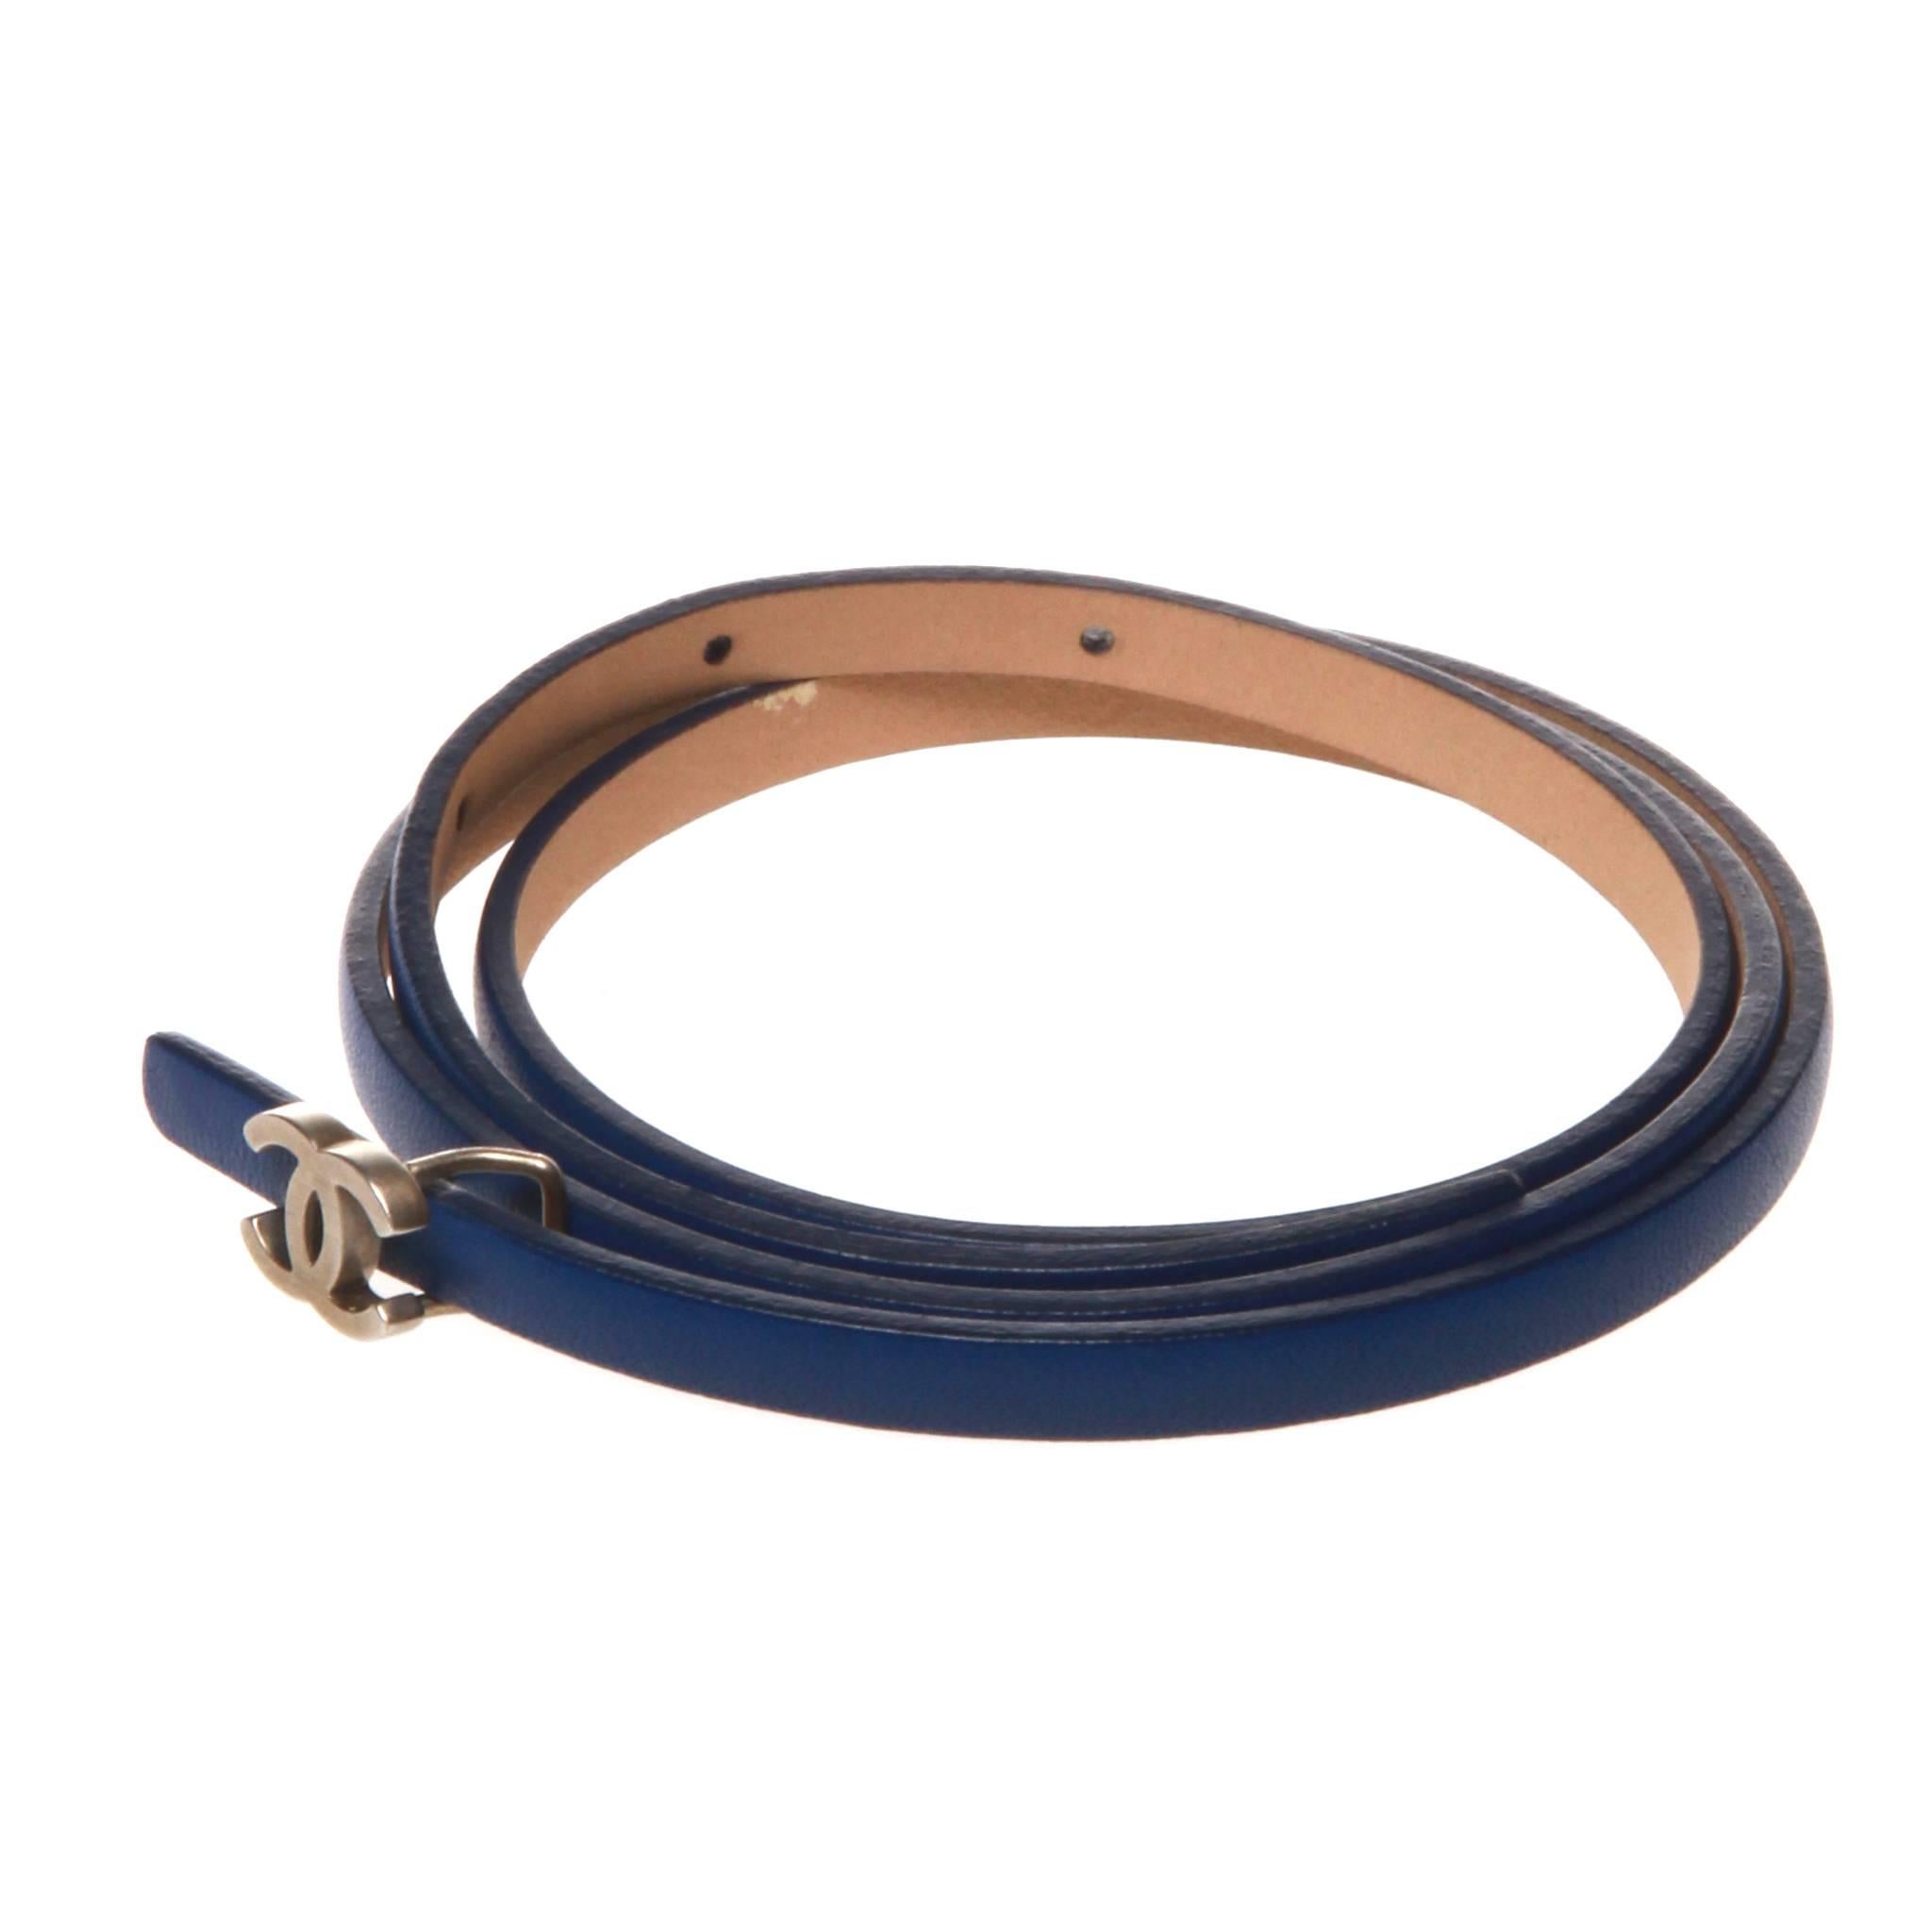 Chanel blue leather belt with CC logo front buckle. 

Size 70/28

Stamped: B 13 P - Spring 2013